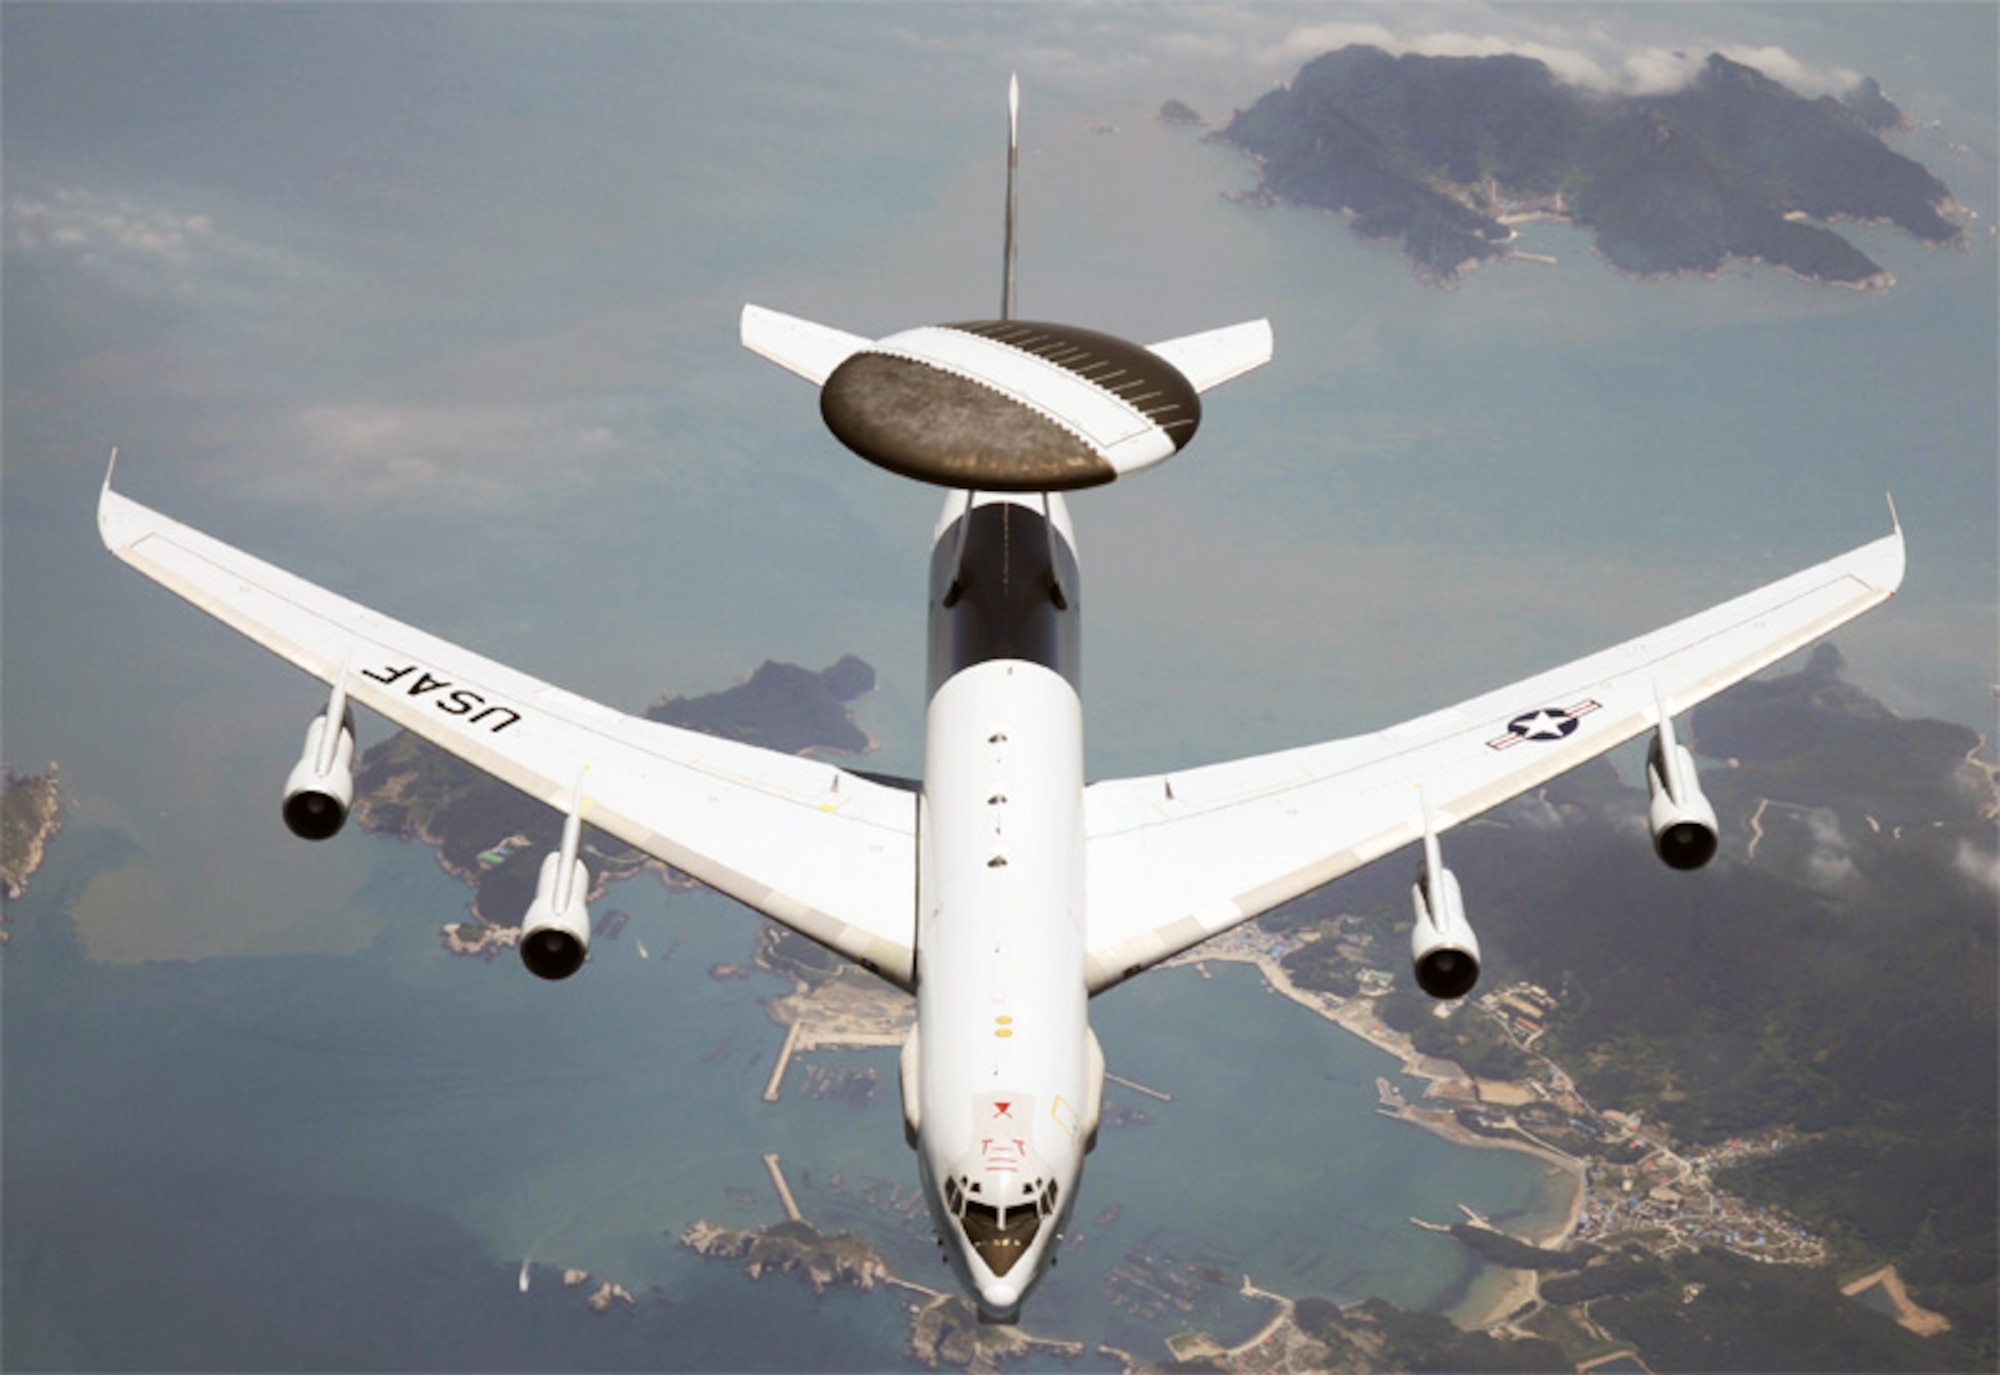 An E-3G “Sentrry” Airborne Warning and Control System aircraft patrols the skies over the U.S. on a recent homeland defense mission. (U.S. Air Force photo)